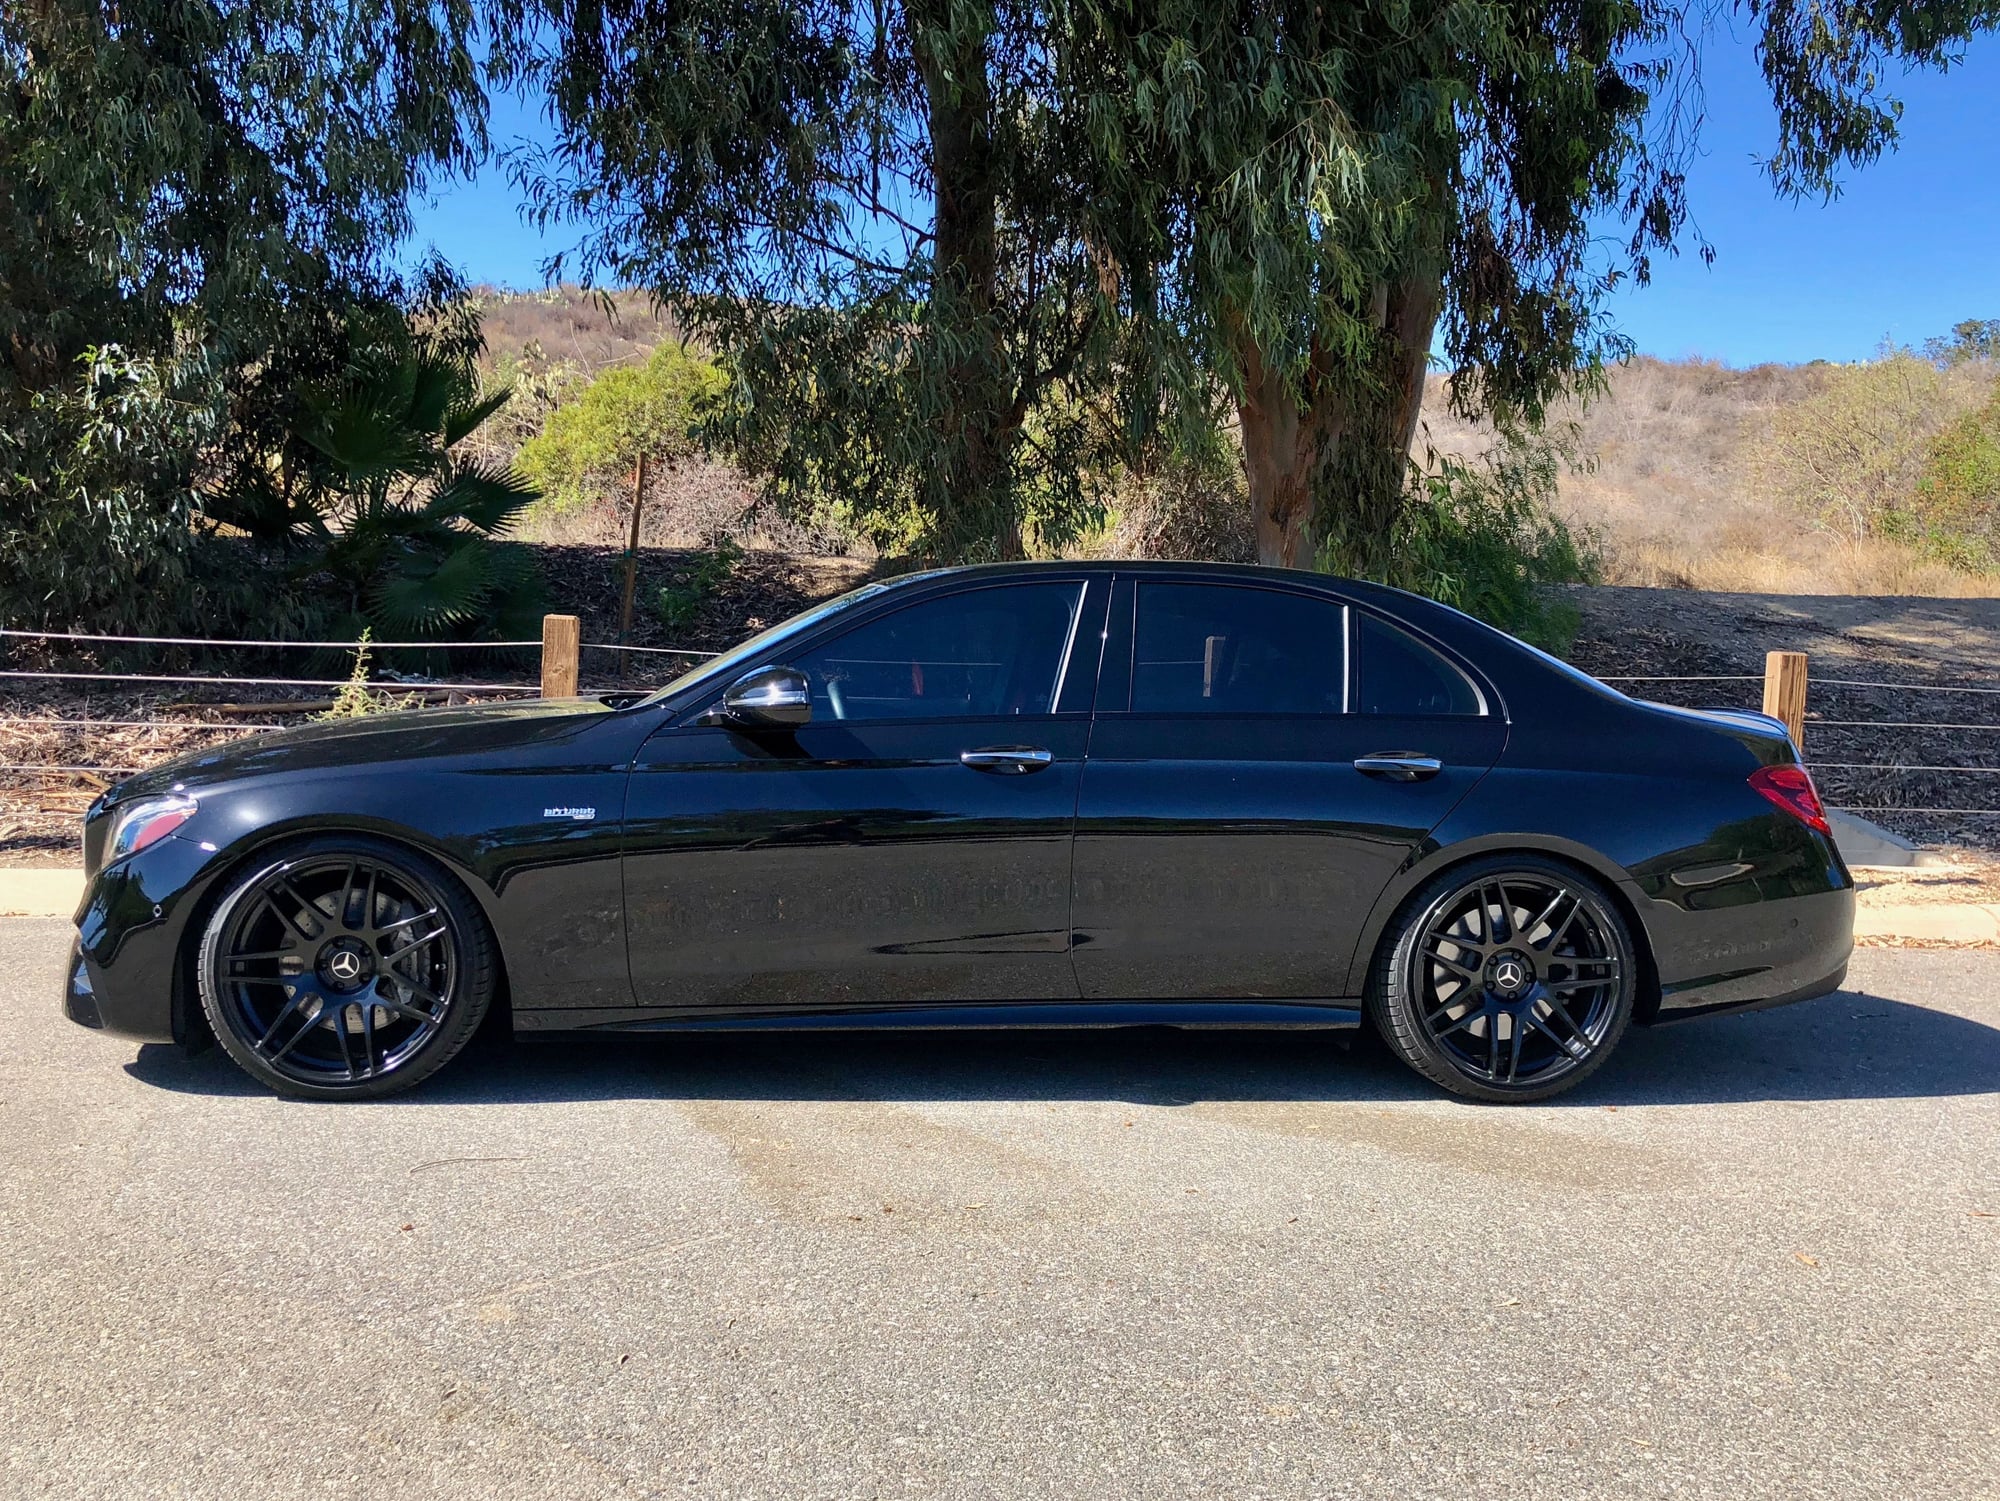 Wheels and Tires/Axles - 20" Forgestar F14 - Matte Black W/Pirelli Tires - Used - All Years Mercedes-Benz All Models - Irvine, CA 92603, United States